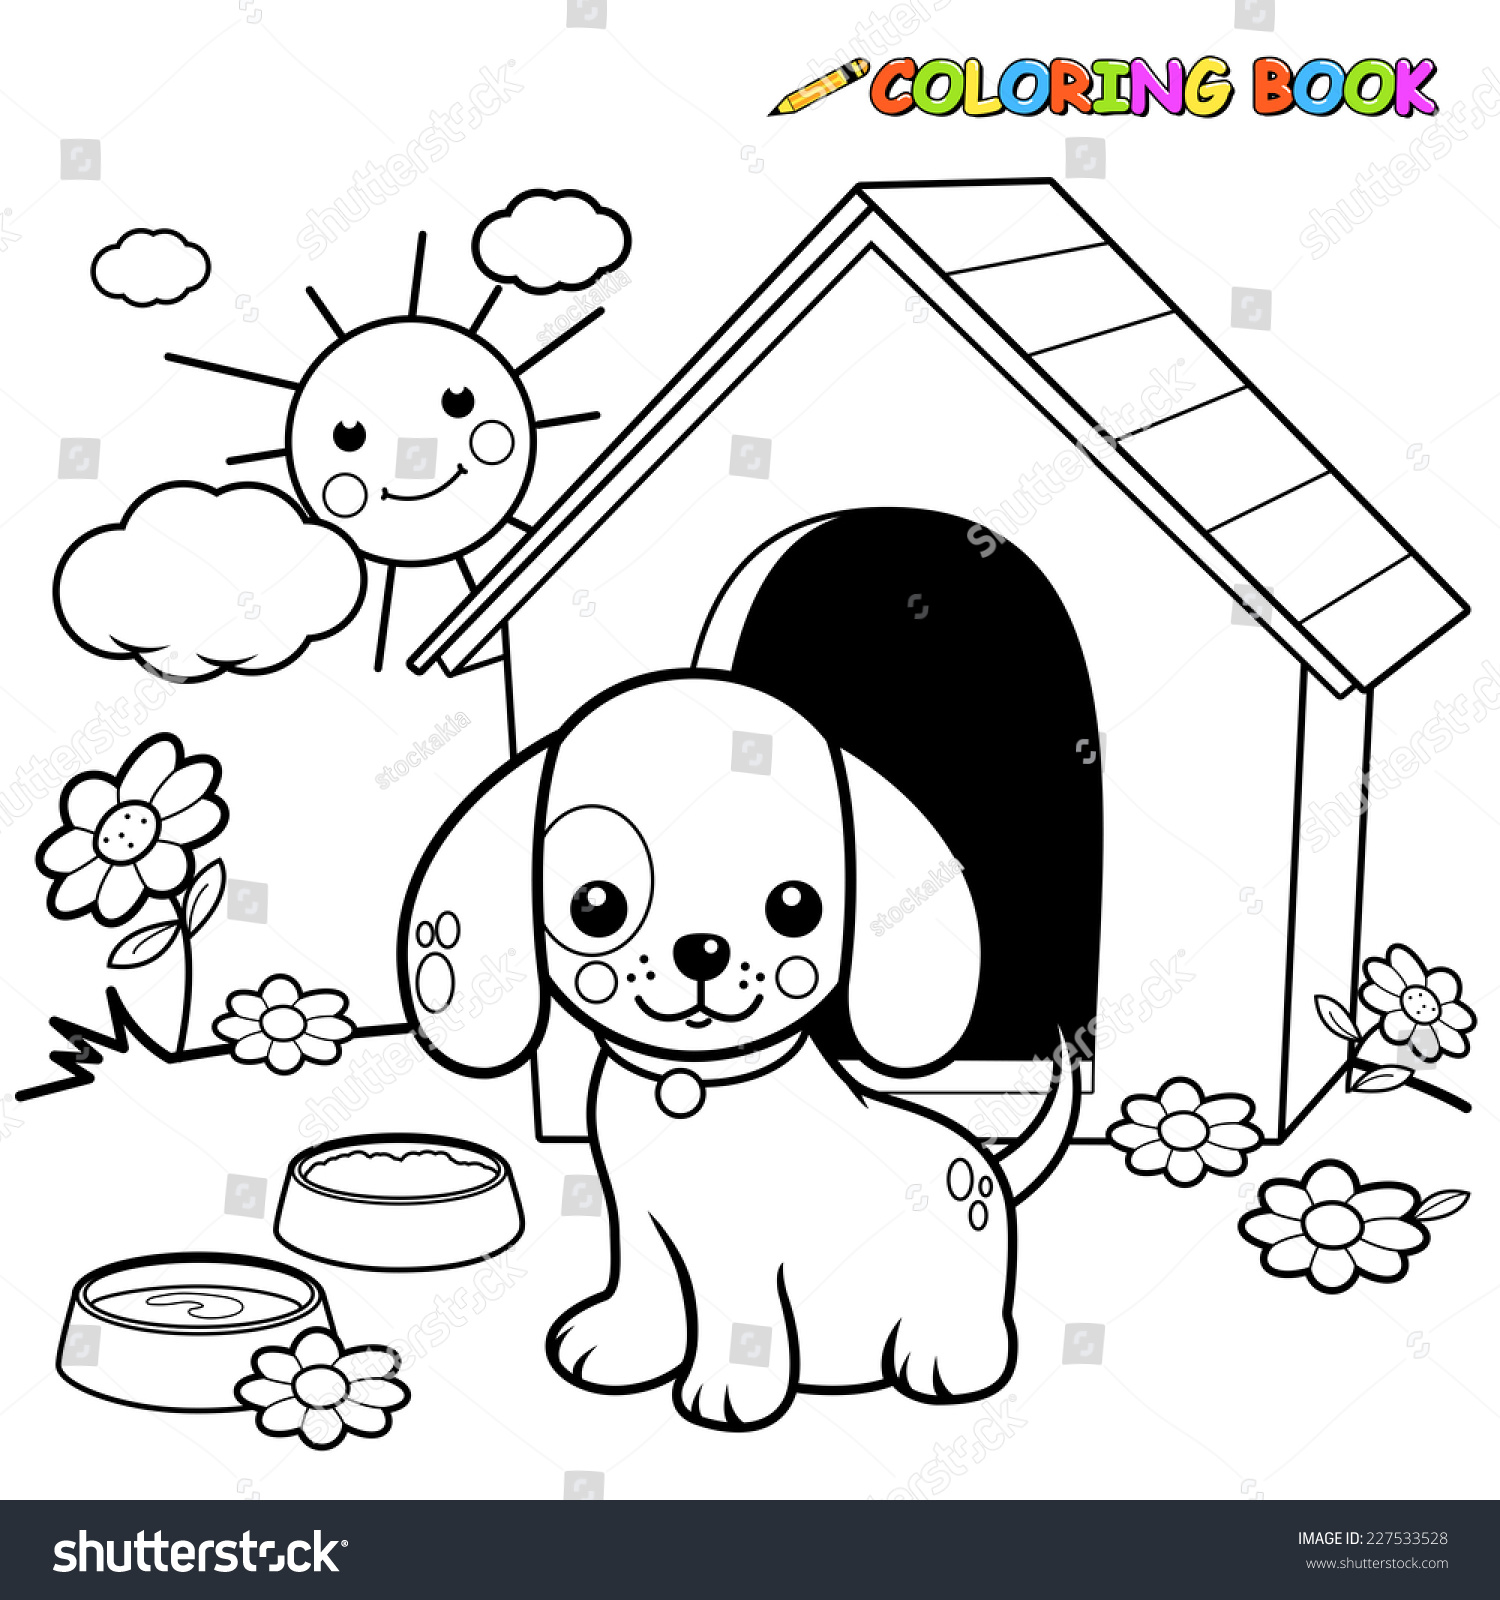 Hd Wallpapers Animals Homes Coloring Pages Free High Quality